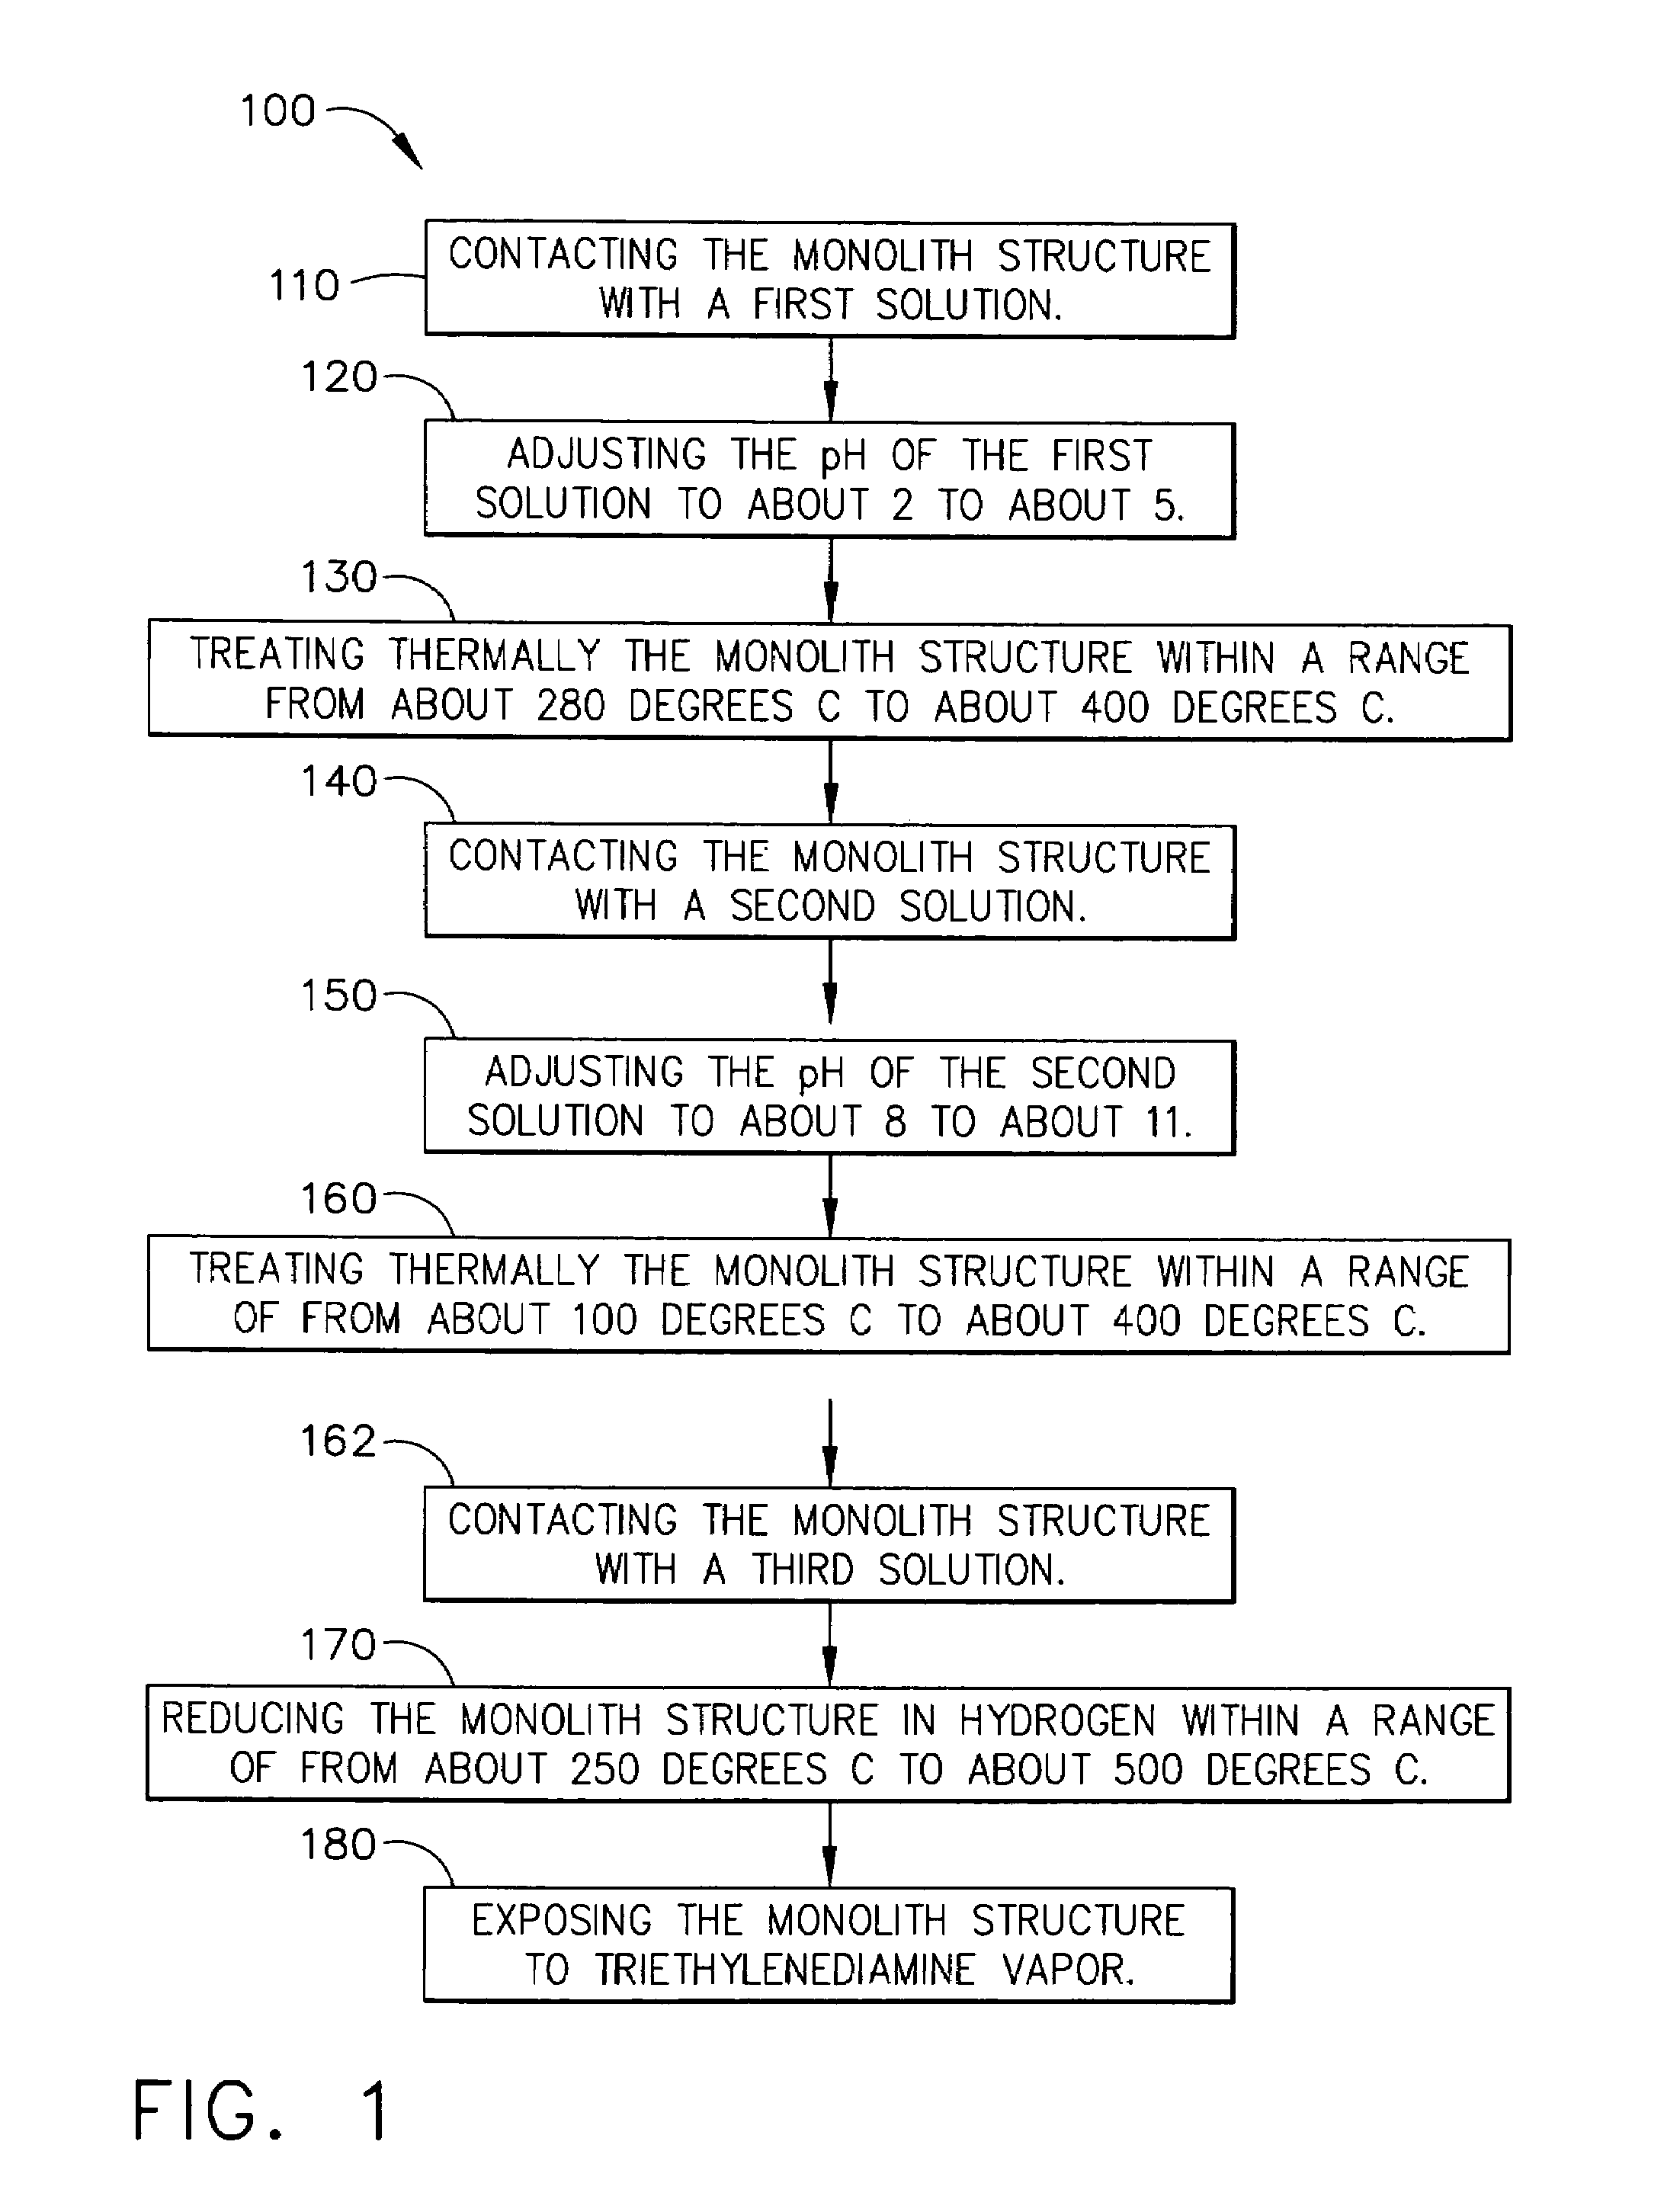 Structured adsorbent media for purifying contaminated air